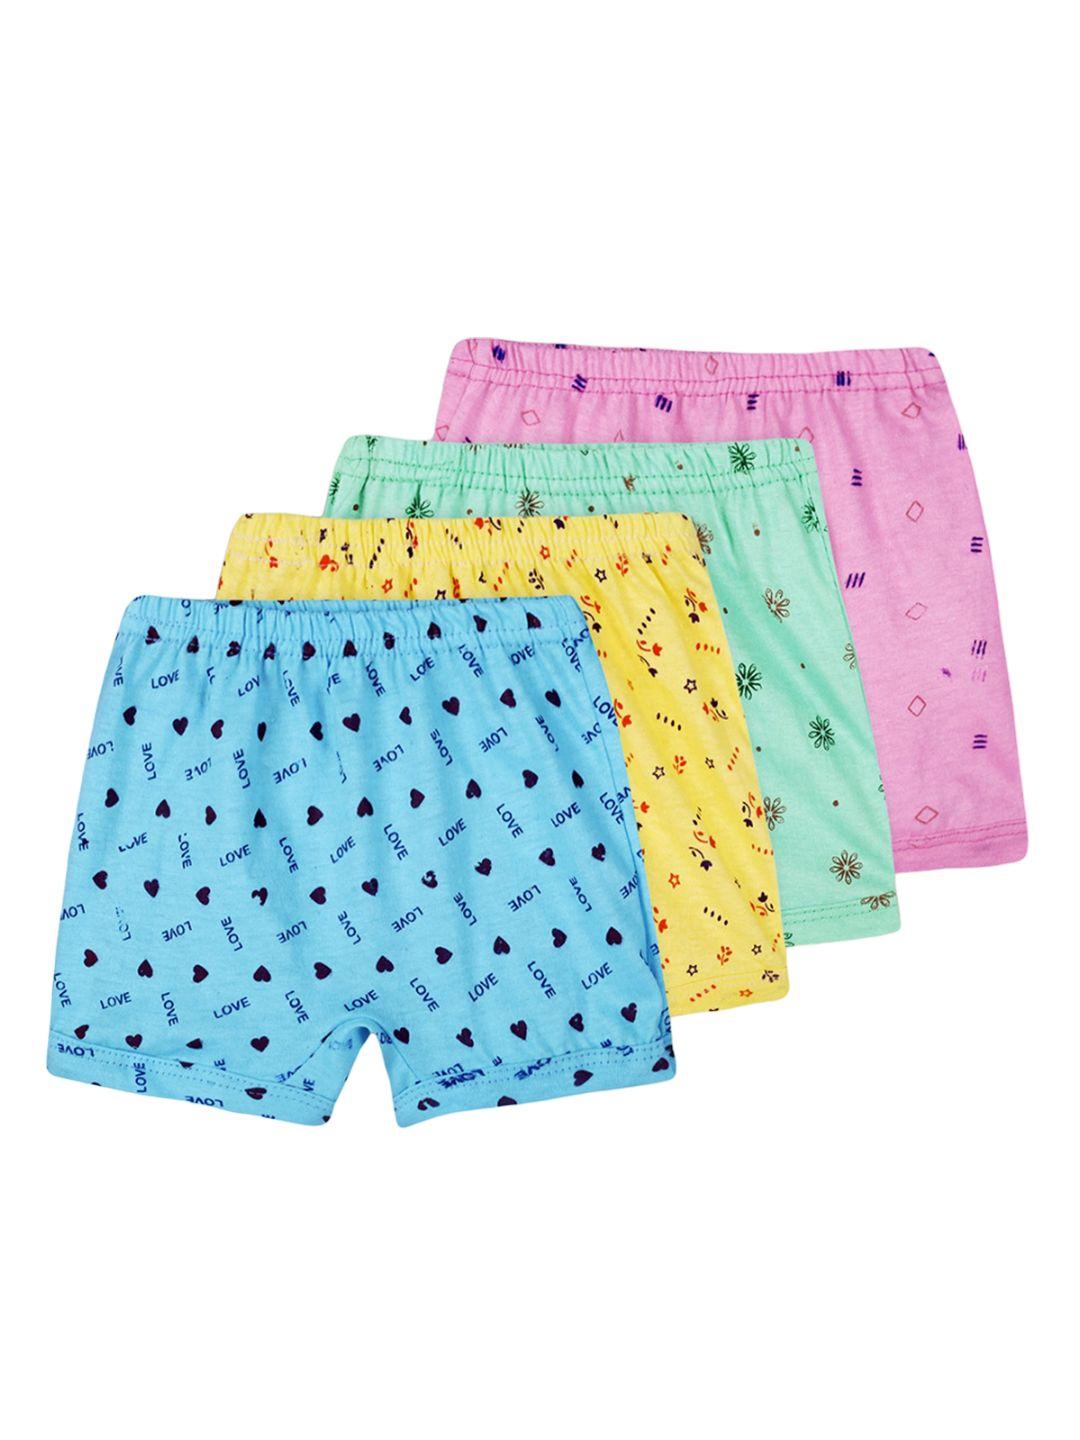 baesd kids pack of 12  printed pure cotton basic briefs 26_s.a.o_po-4